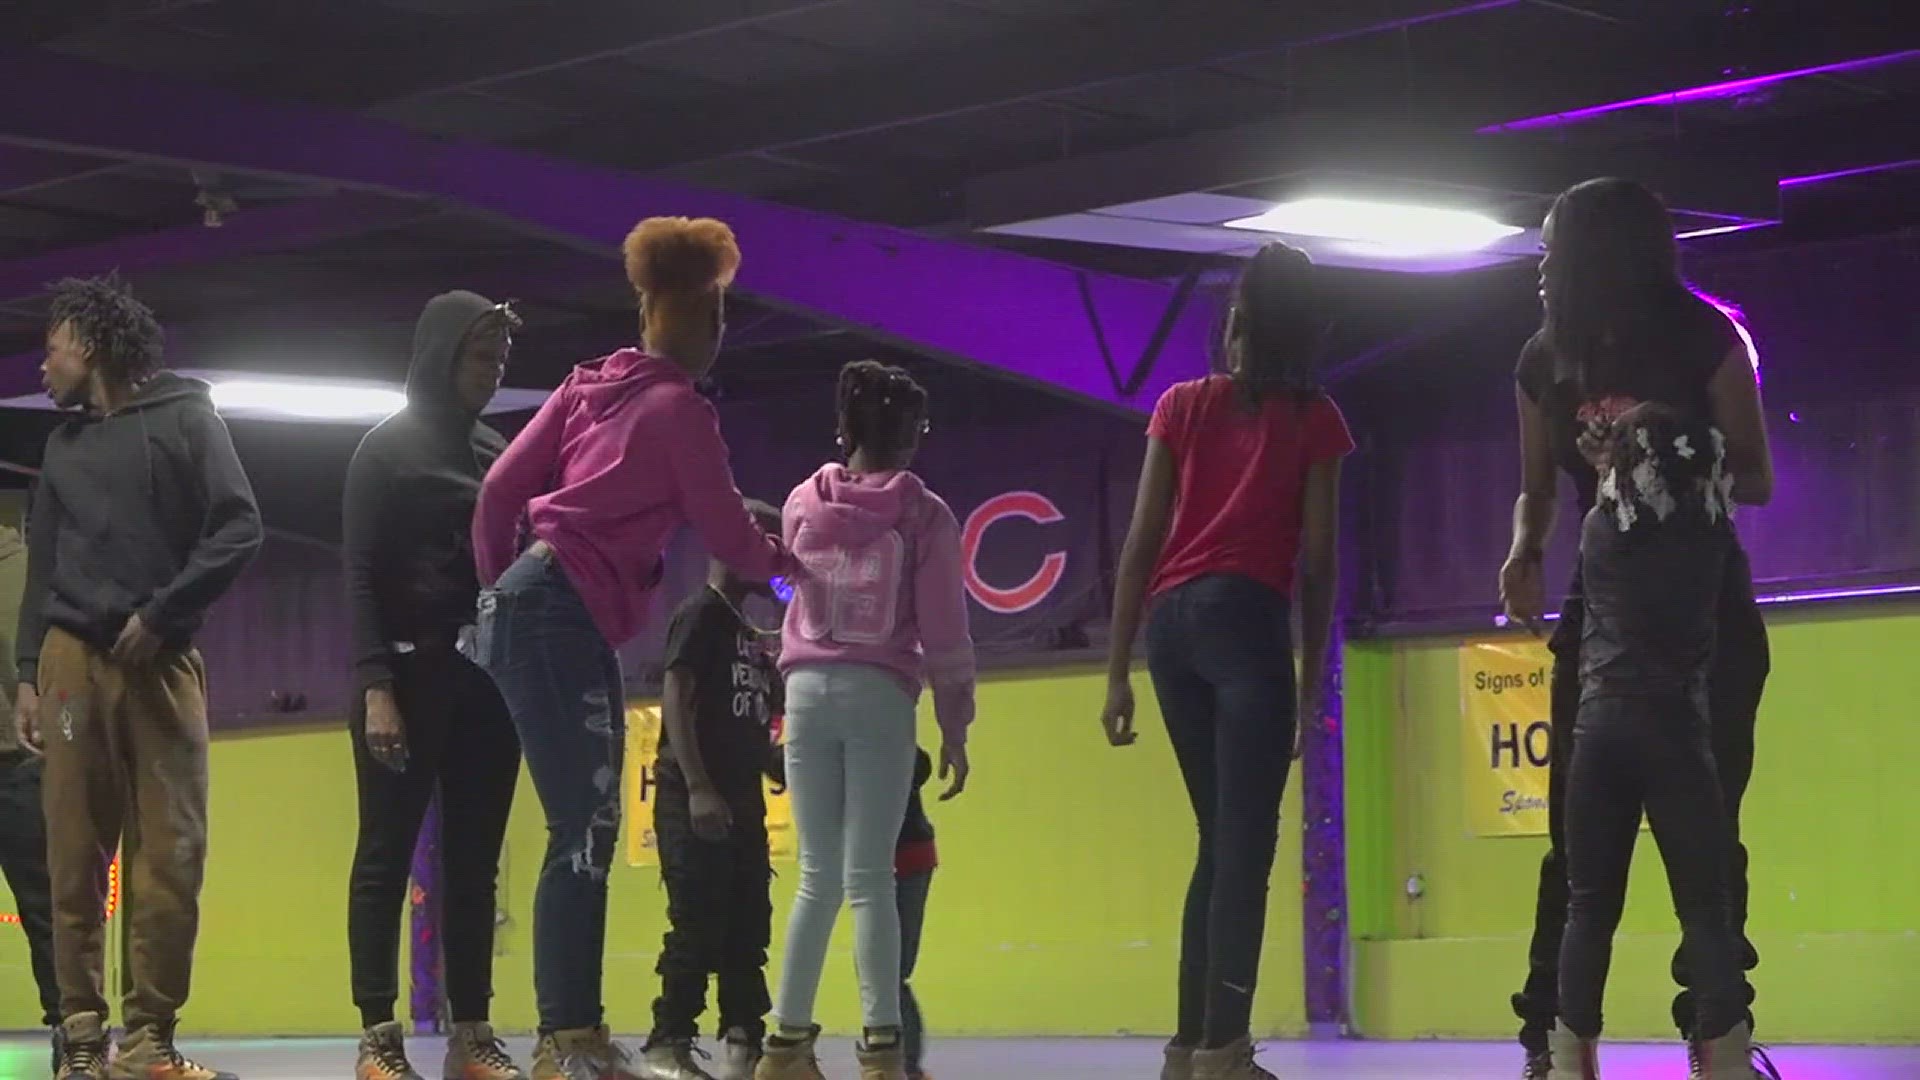 This weekend the community held a fundraiser to help the Skate Palace in Galesburg to resurface the skating surface.